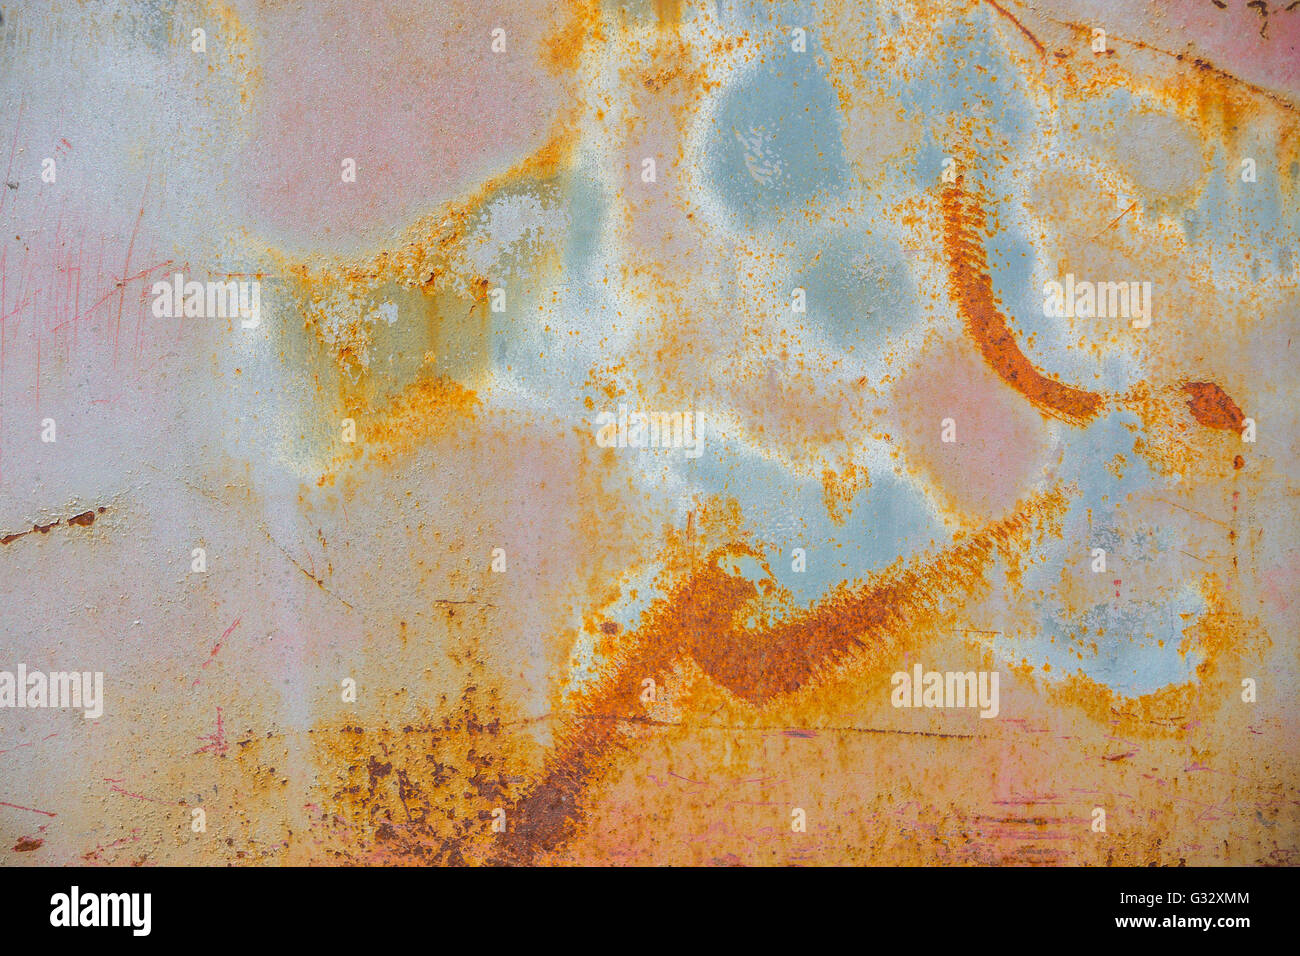 a detail of the side of a above ground gas tank.  Image looks like an abstract paintings Stock Photo